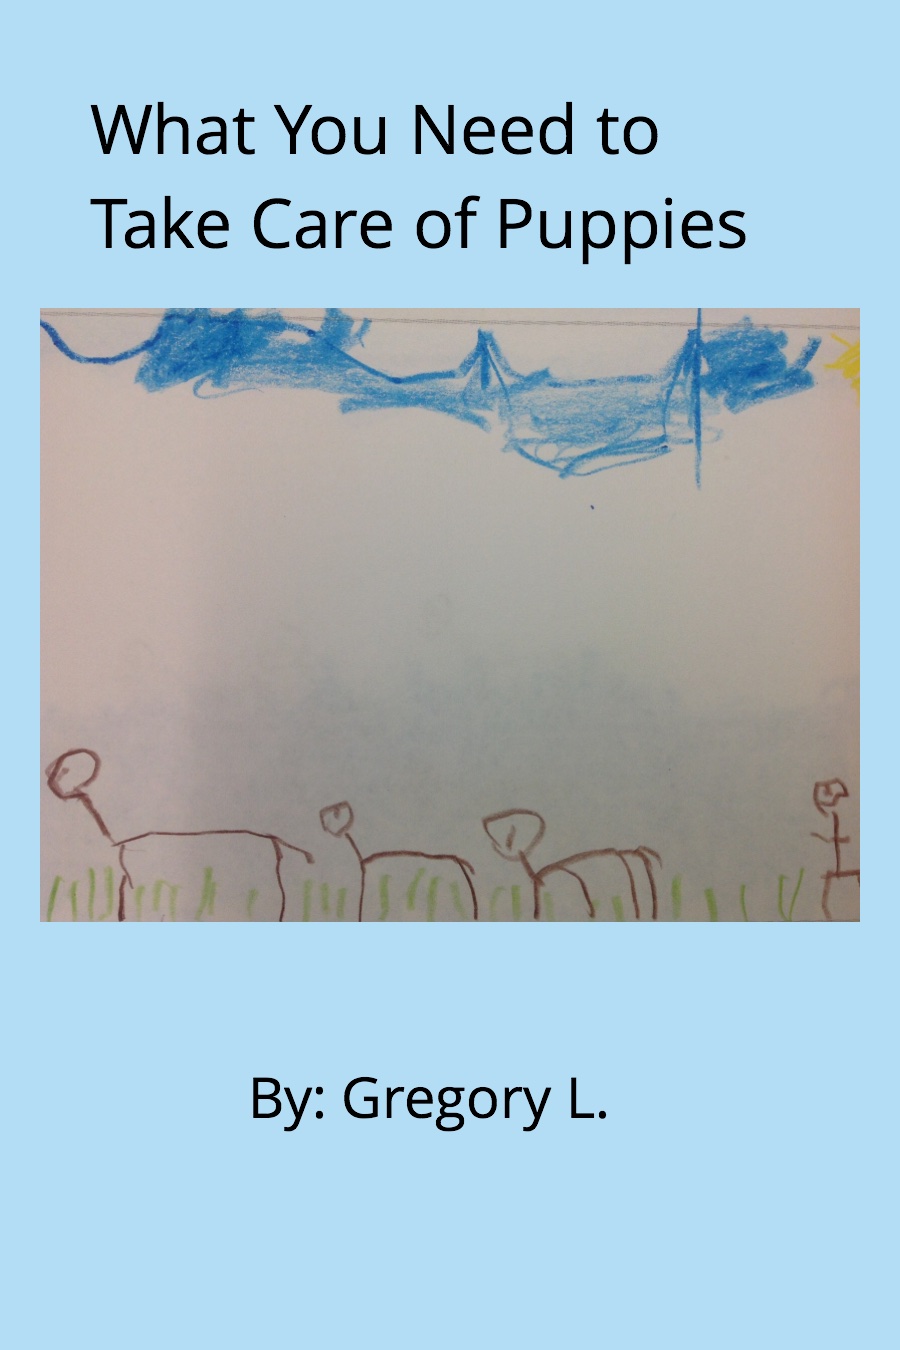 What You Need to Take Care of Puppies by Gregory L